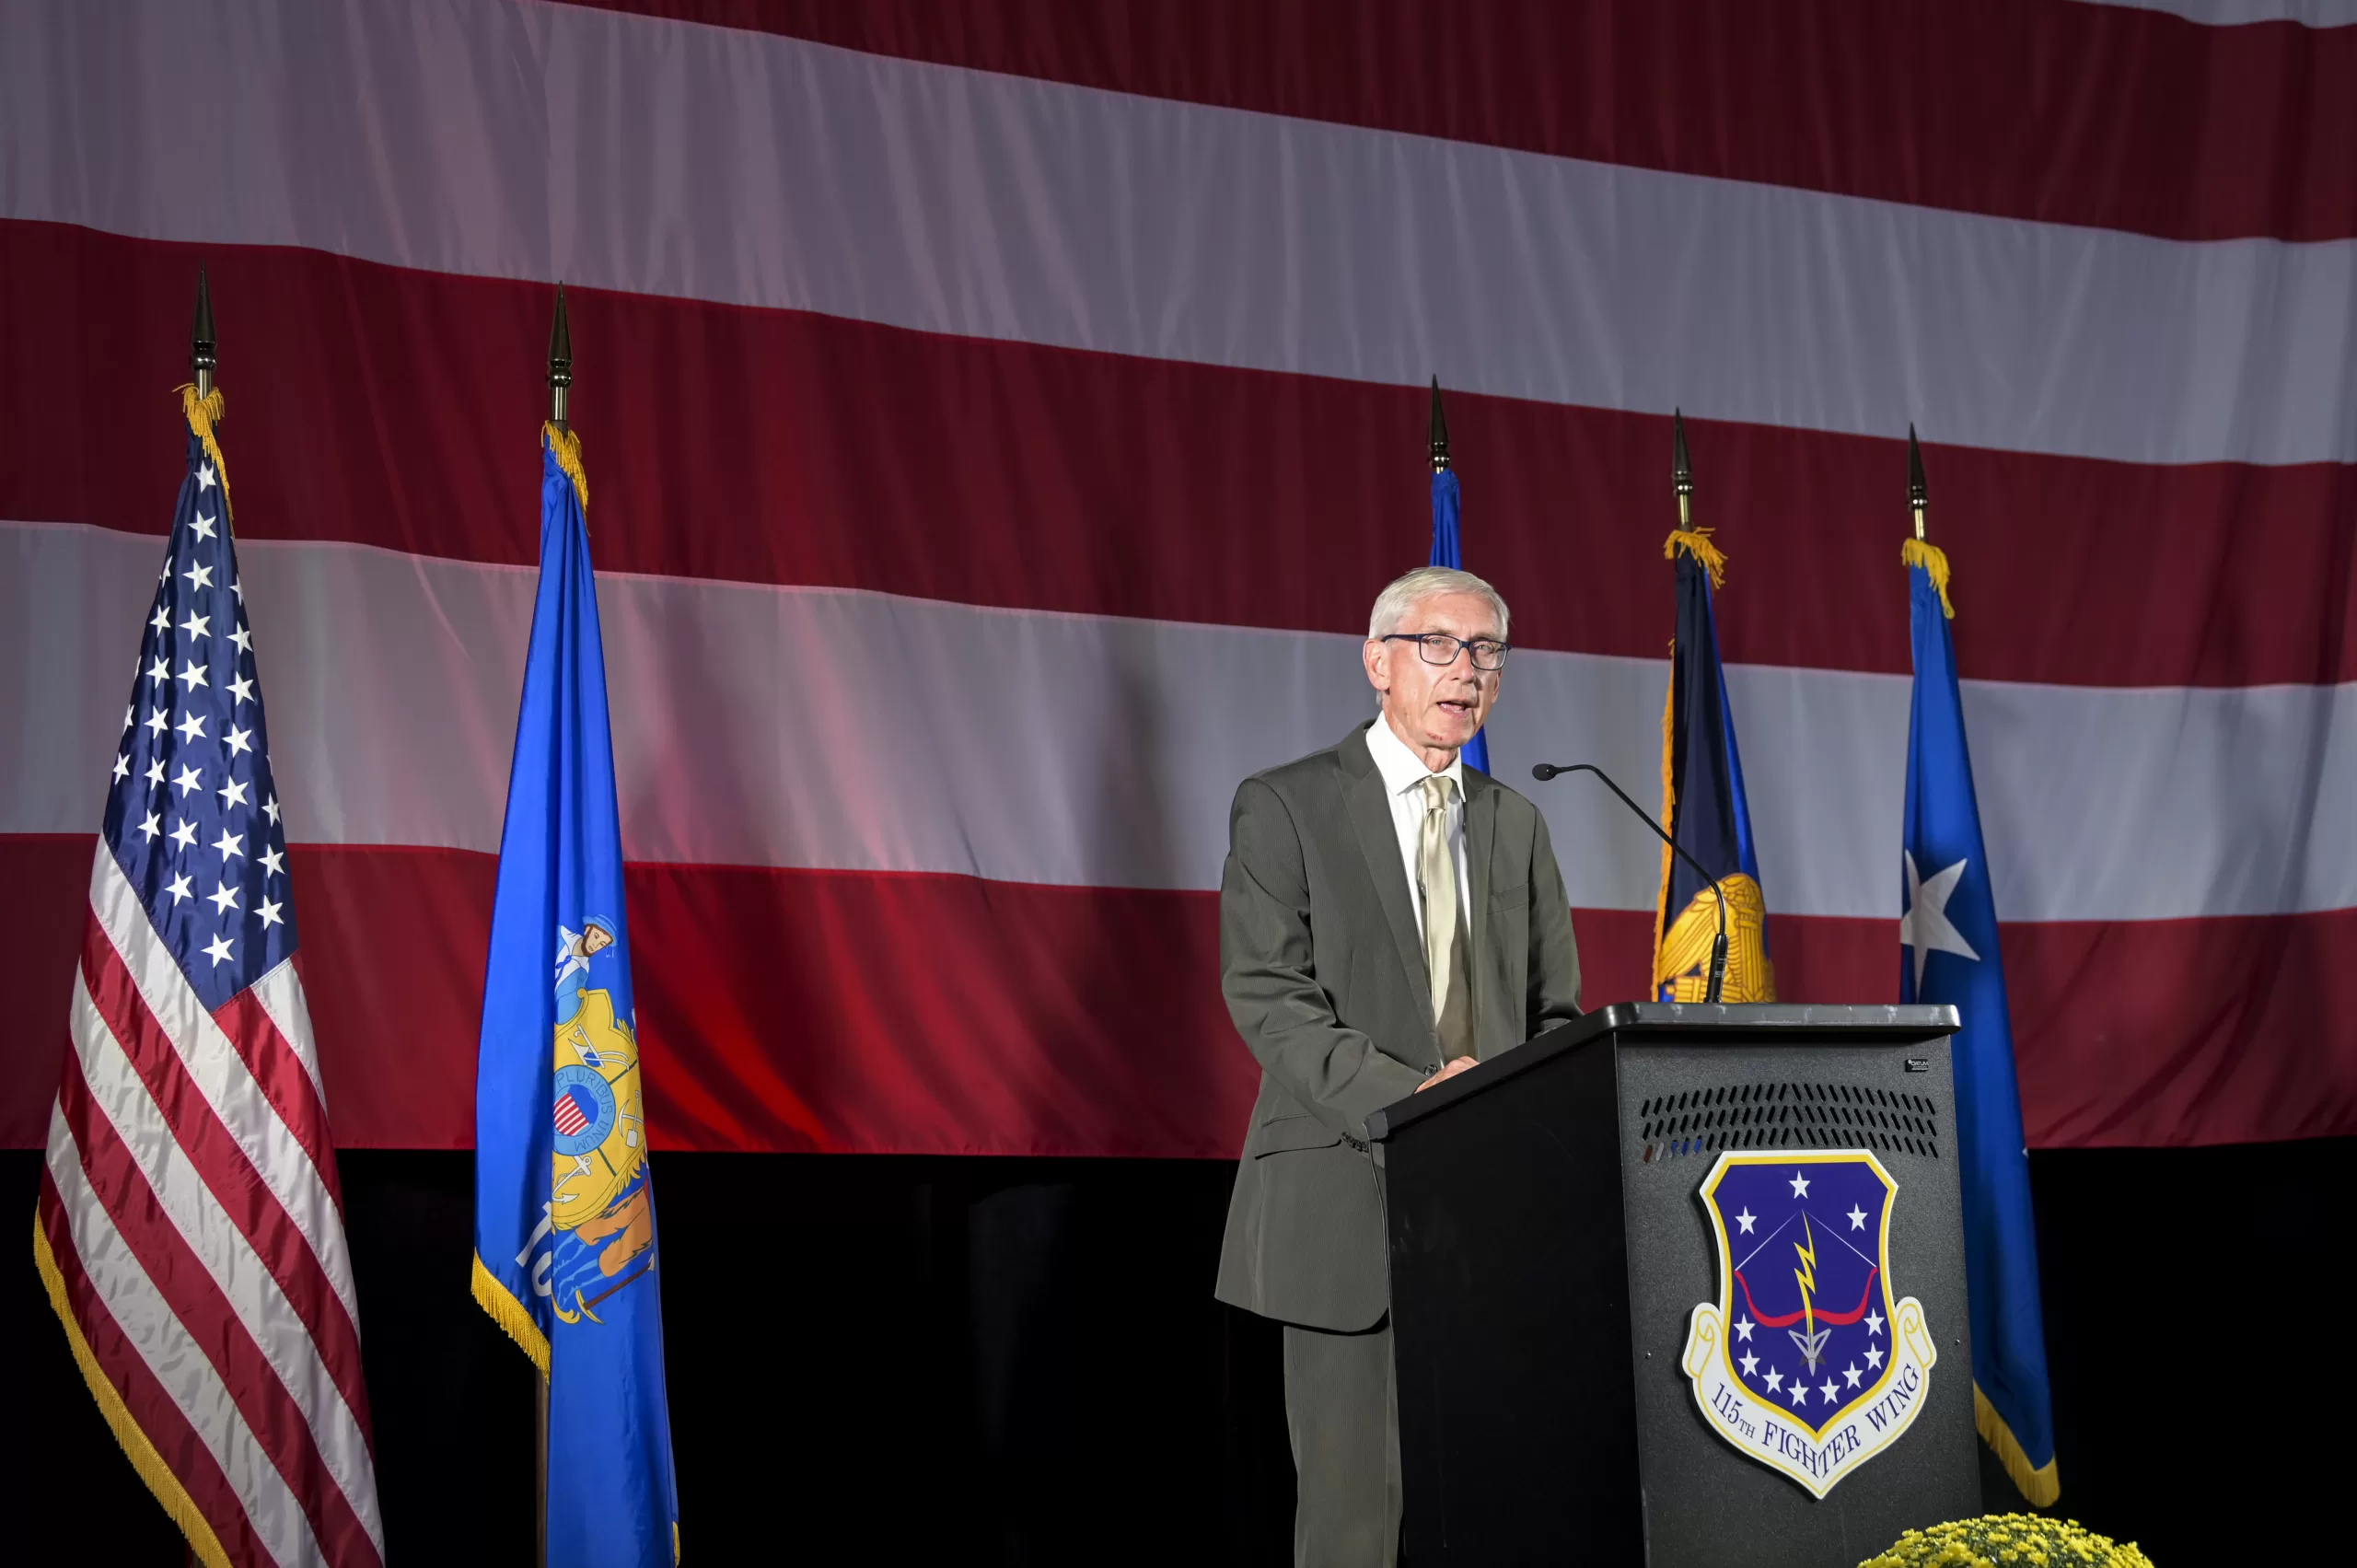 Gov. Tony Evers speaks during a Sept. 7 ceremony at the Wisconsin Air National Guard’s 115th Fighter Wing in Madison, Wis., to commemorate the fighter wing formally accepting the F-35 Lightning II mission. The 115th is only the second Air National Guard to field the 5th-generation fighter jet. 115th Fighter Wing photo by Tech. Sgt. Cameron Lewis